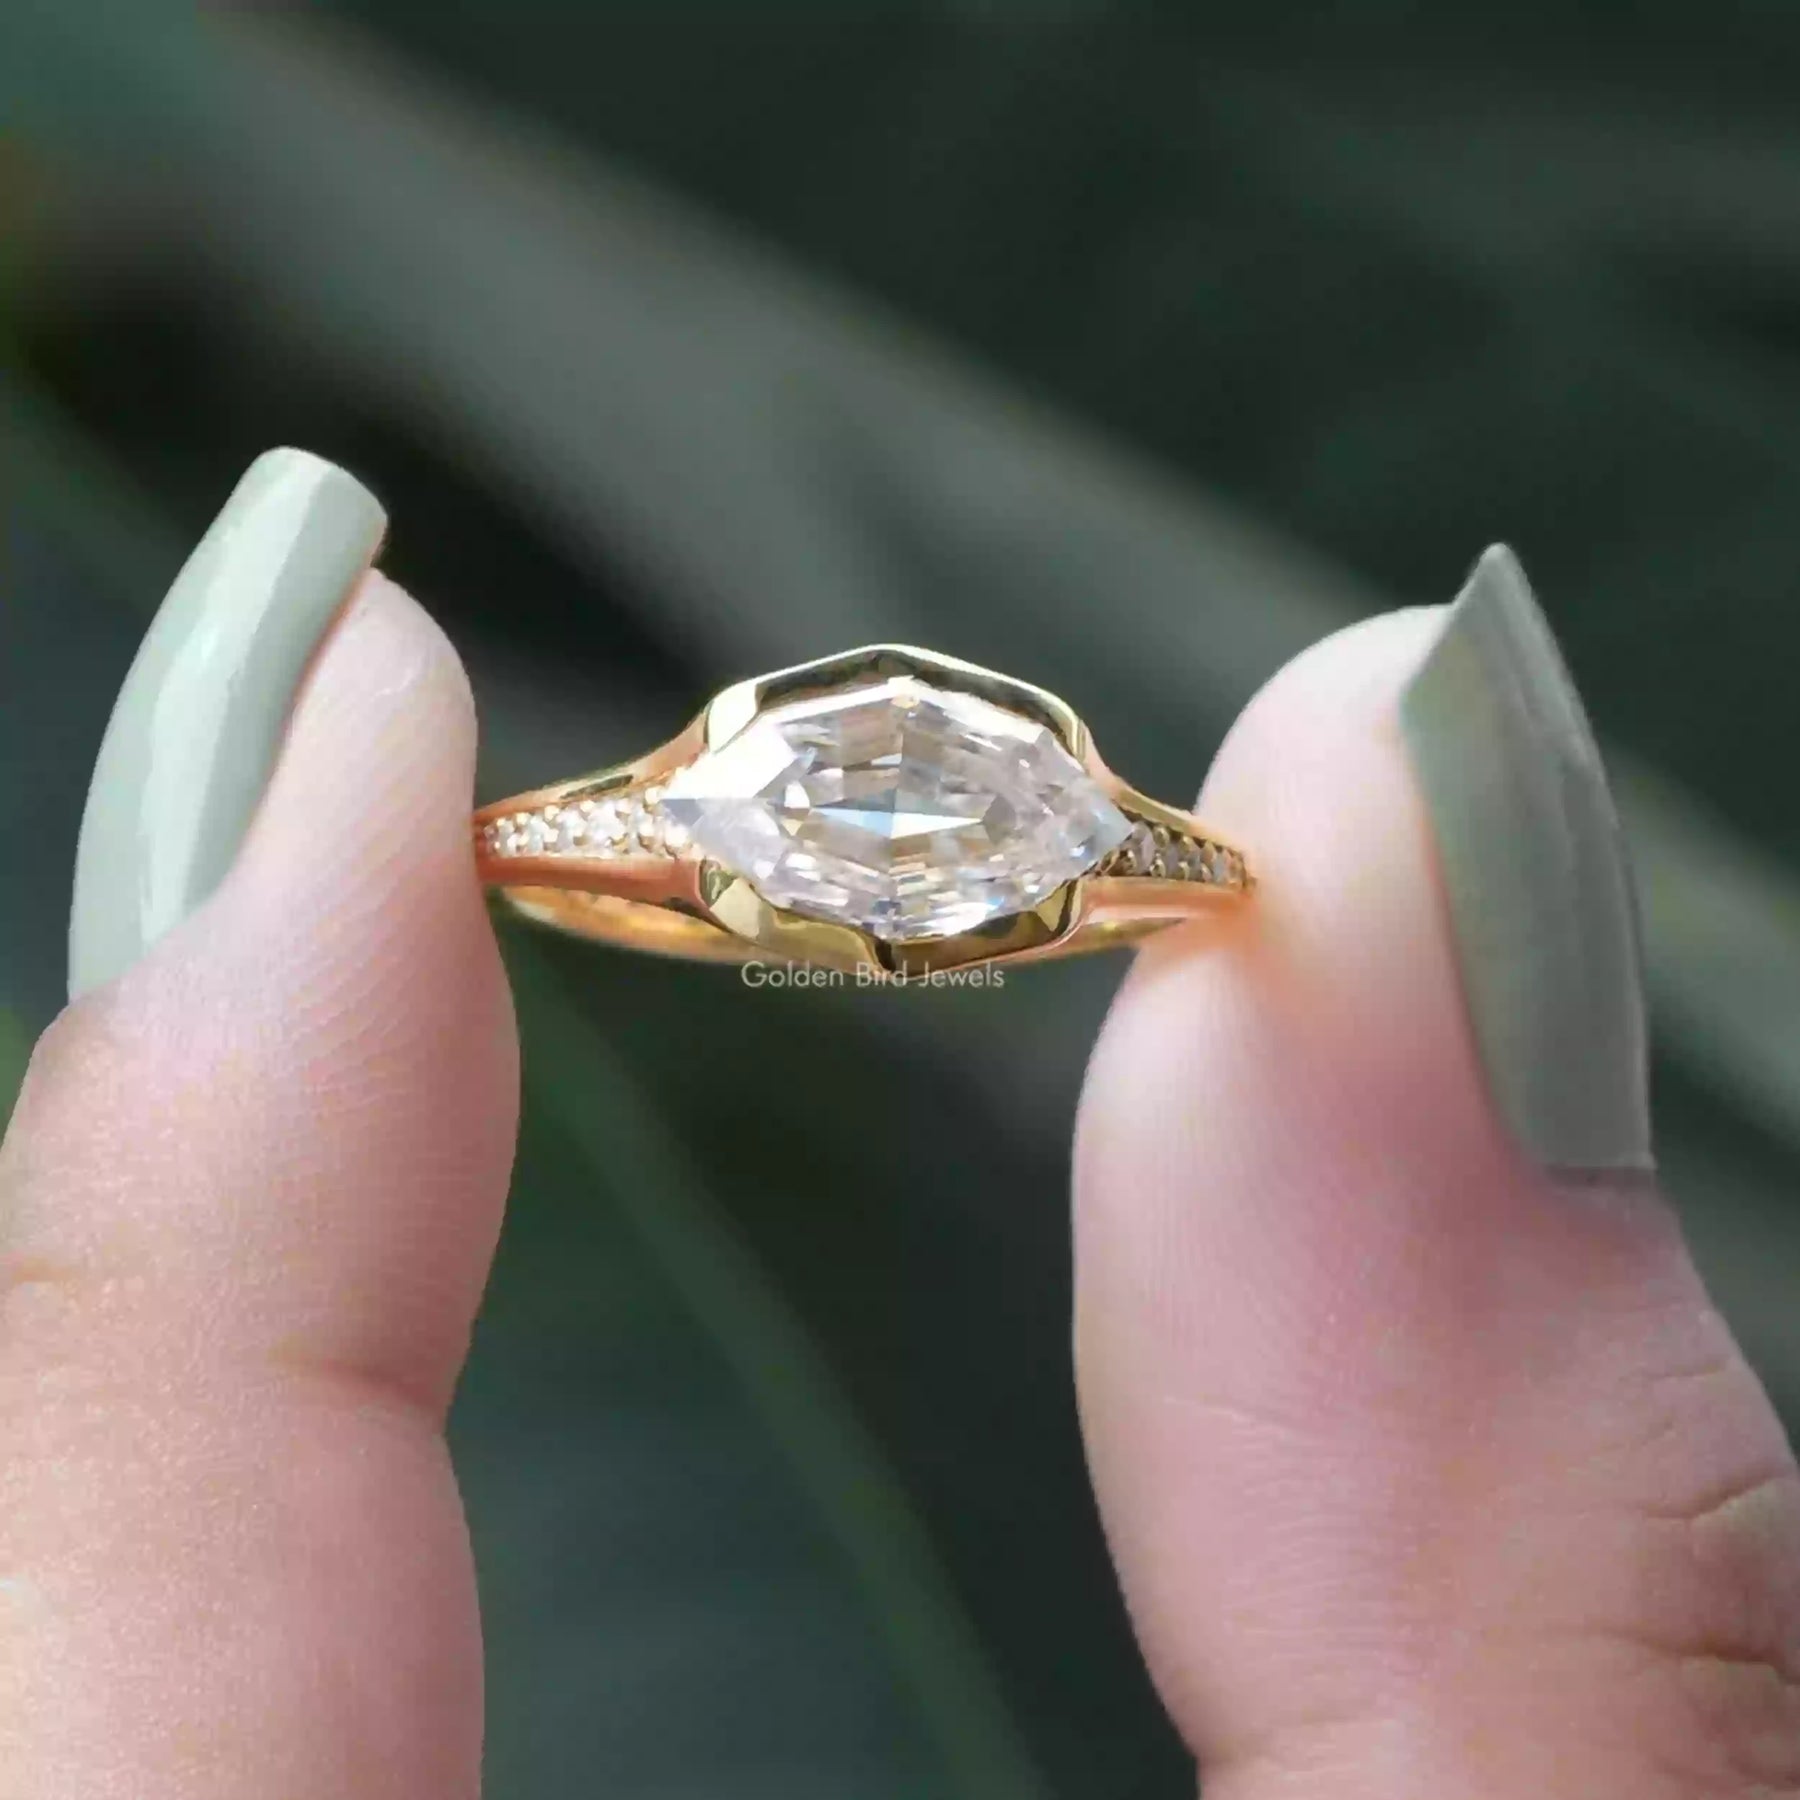 [In two finger front view of step cut marquise wedding ring]-[Golden Bird Jewels]